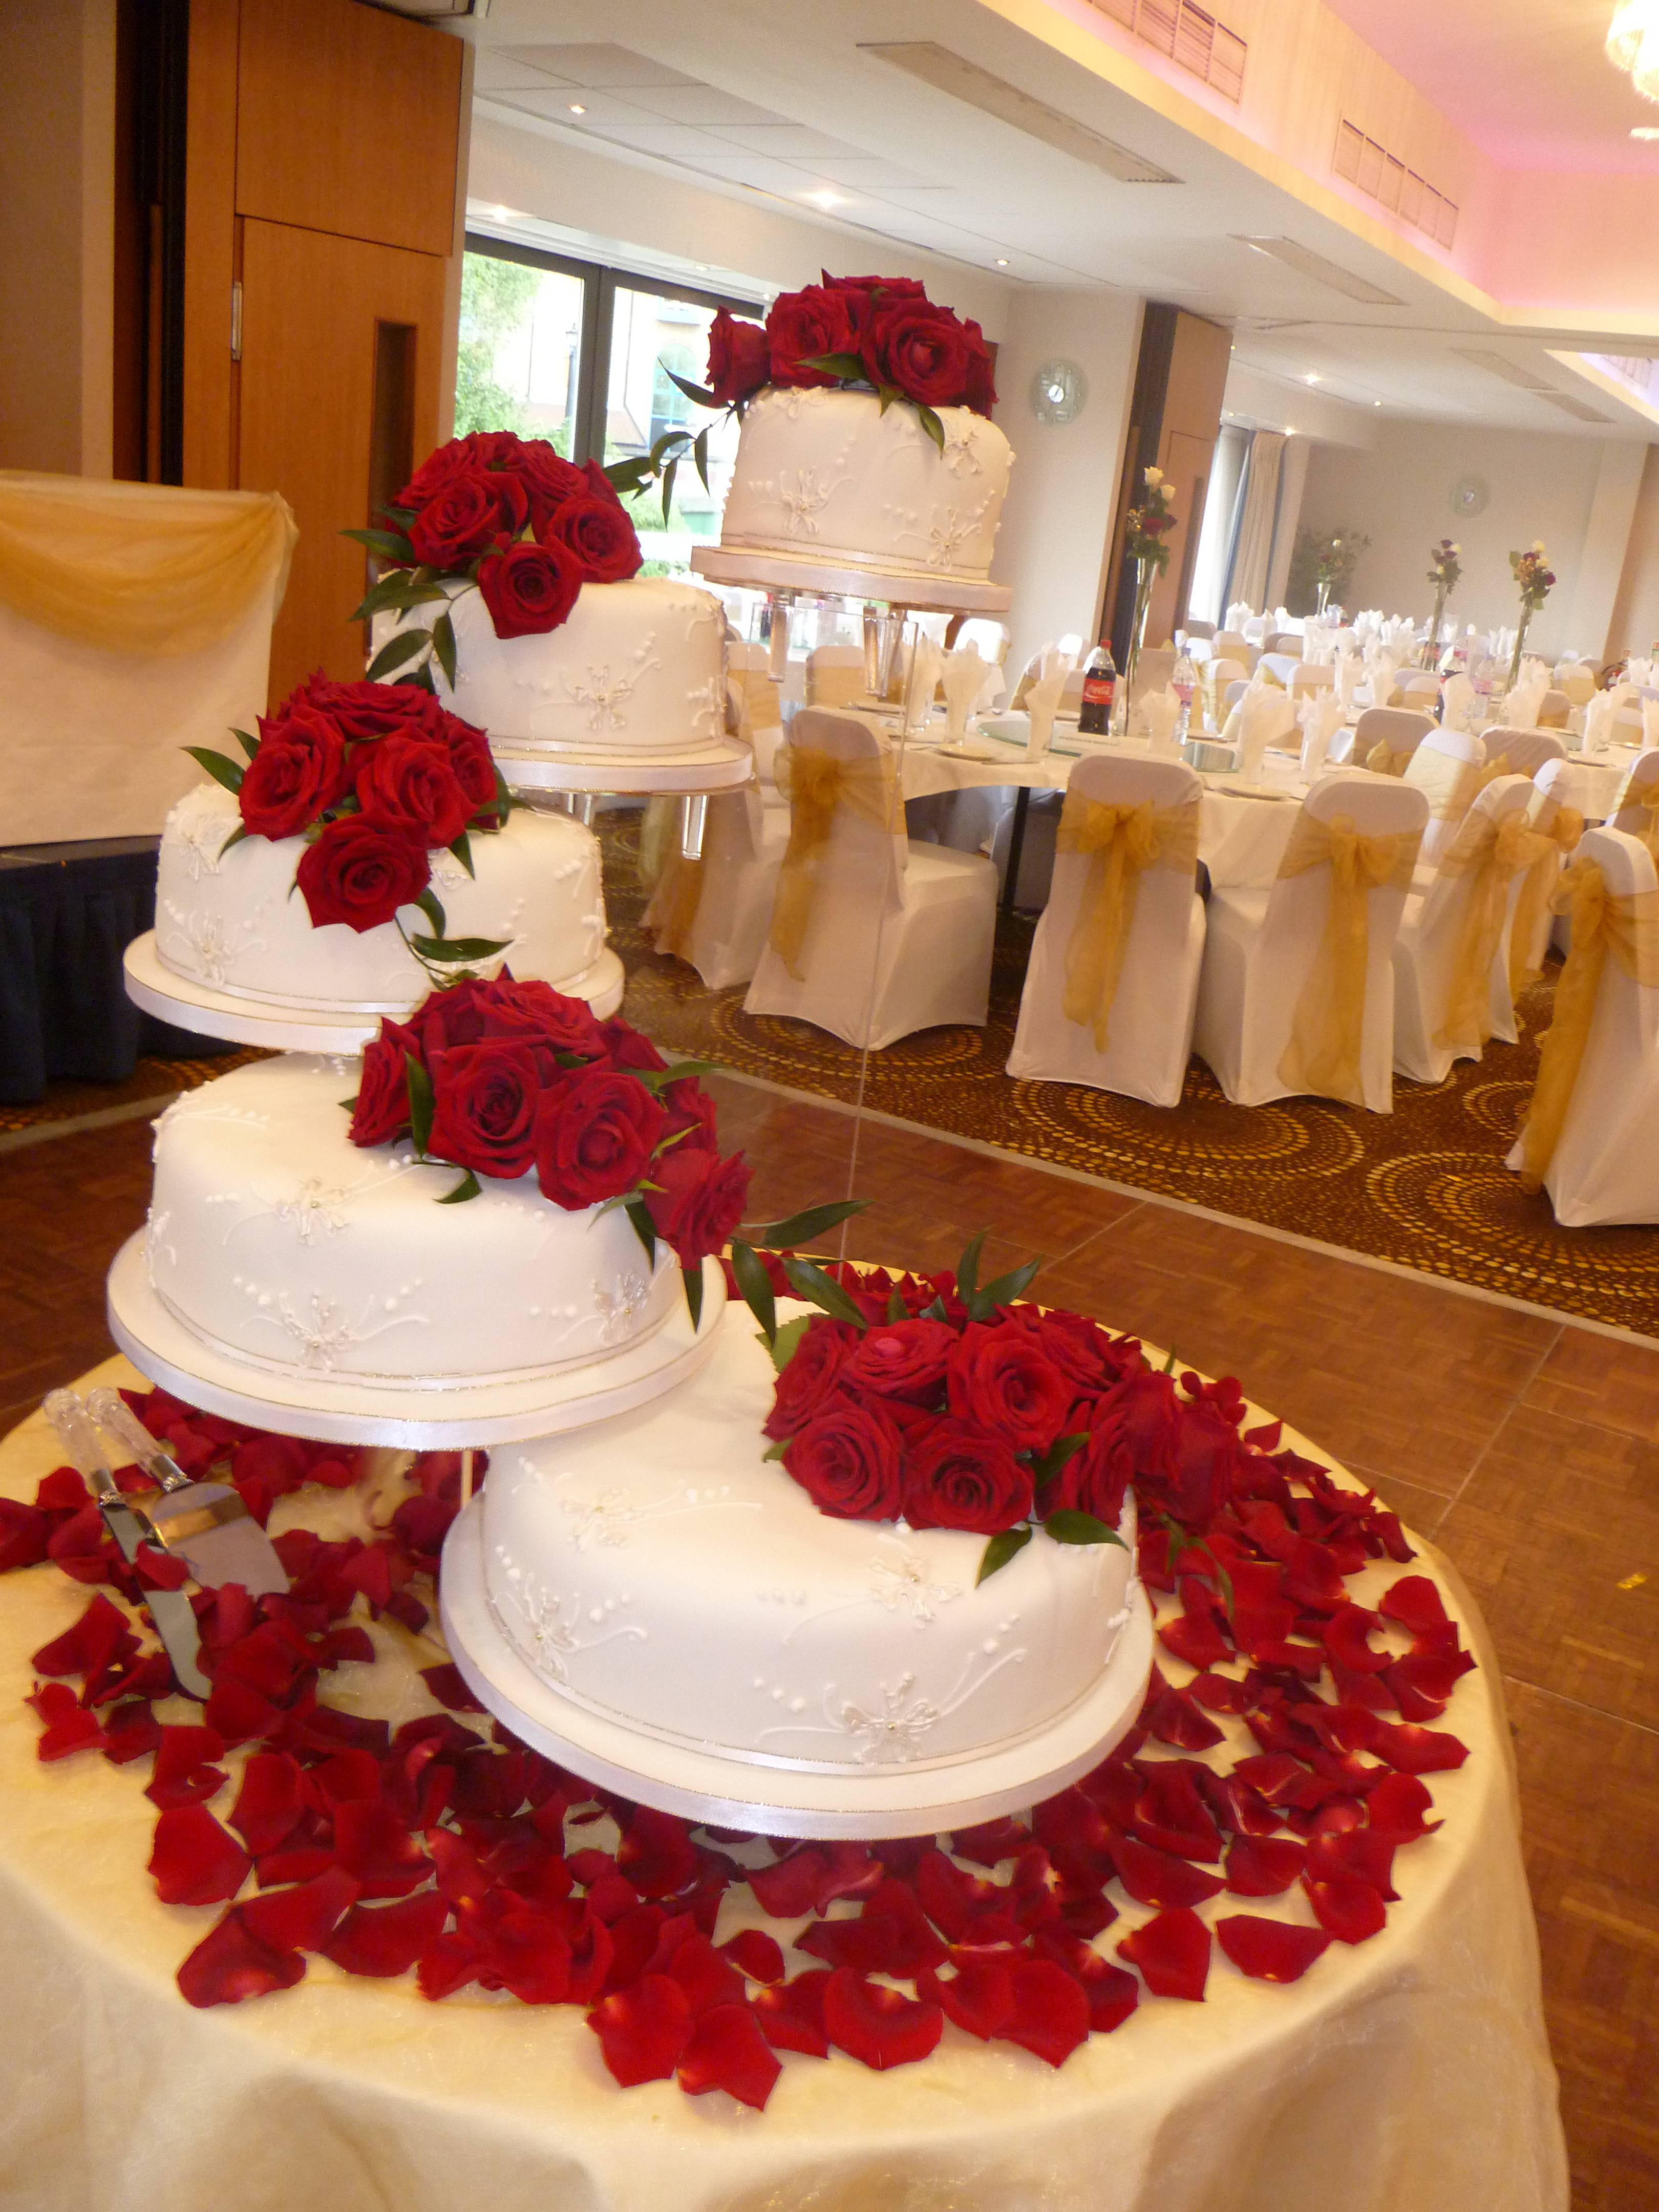 red-and-white-wedding-cake-stanmd.